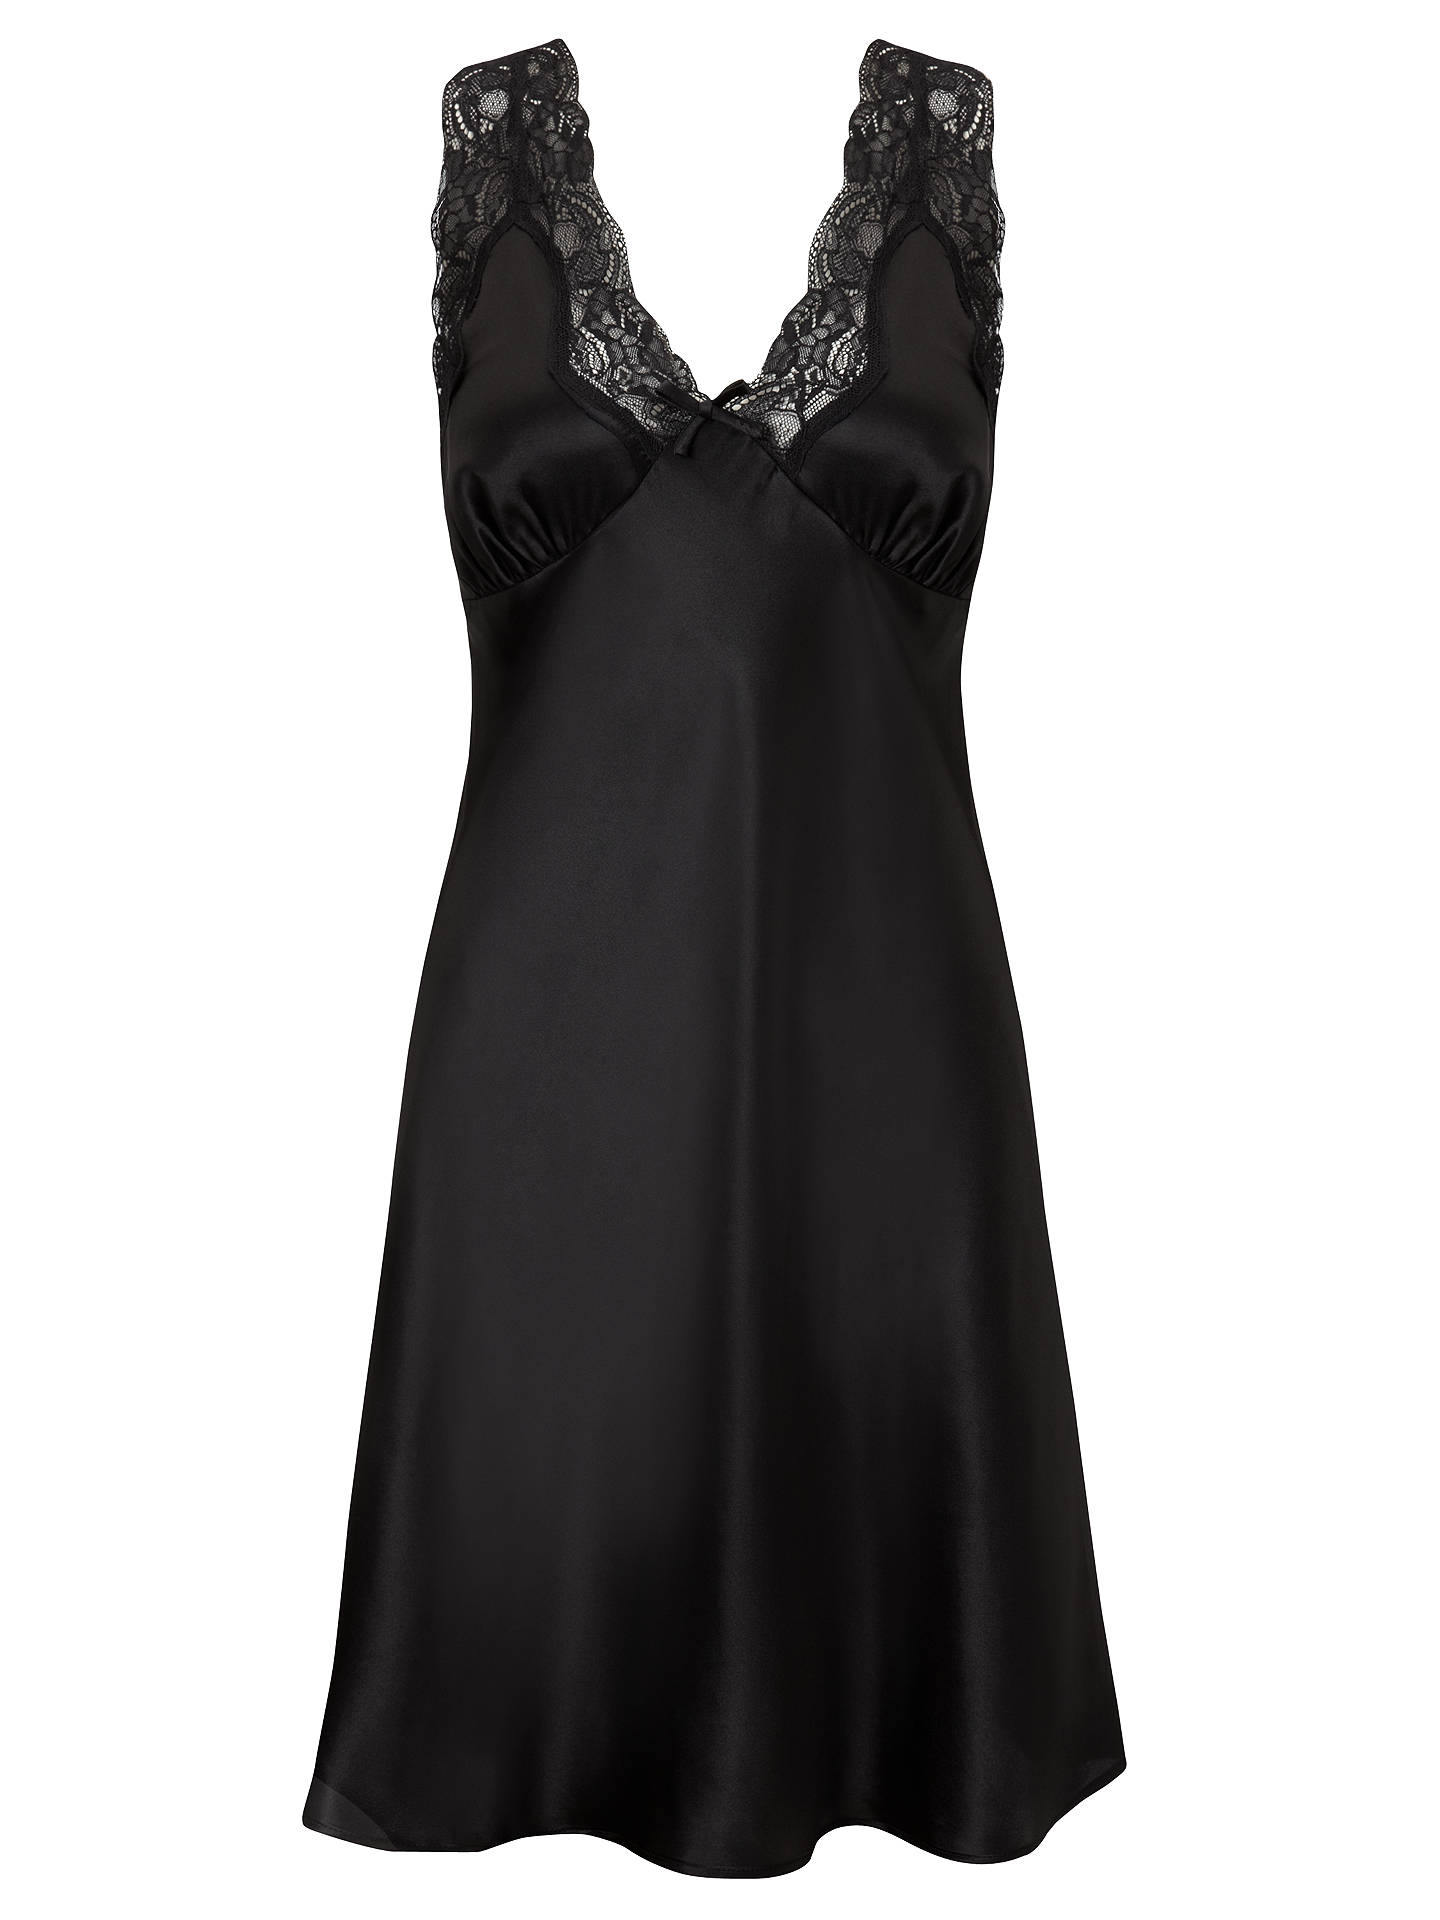 COLLECTION by John Lewis Lulu Silk Chemise at John Lewis & Partners